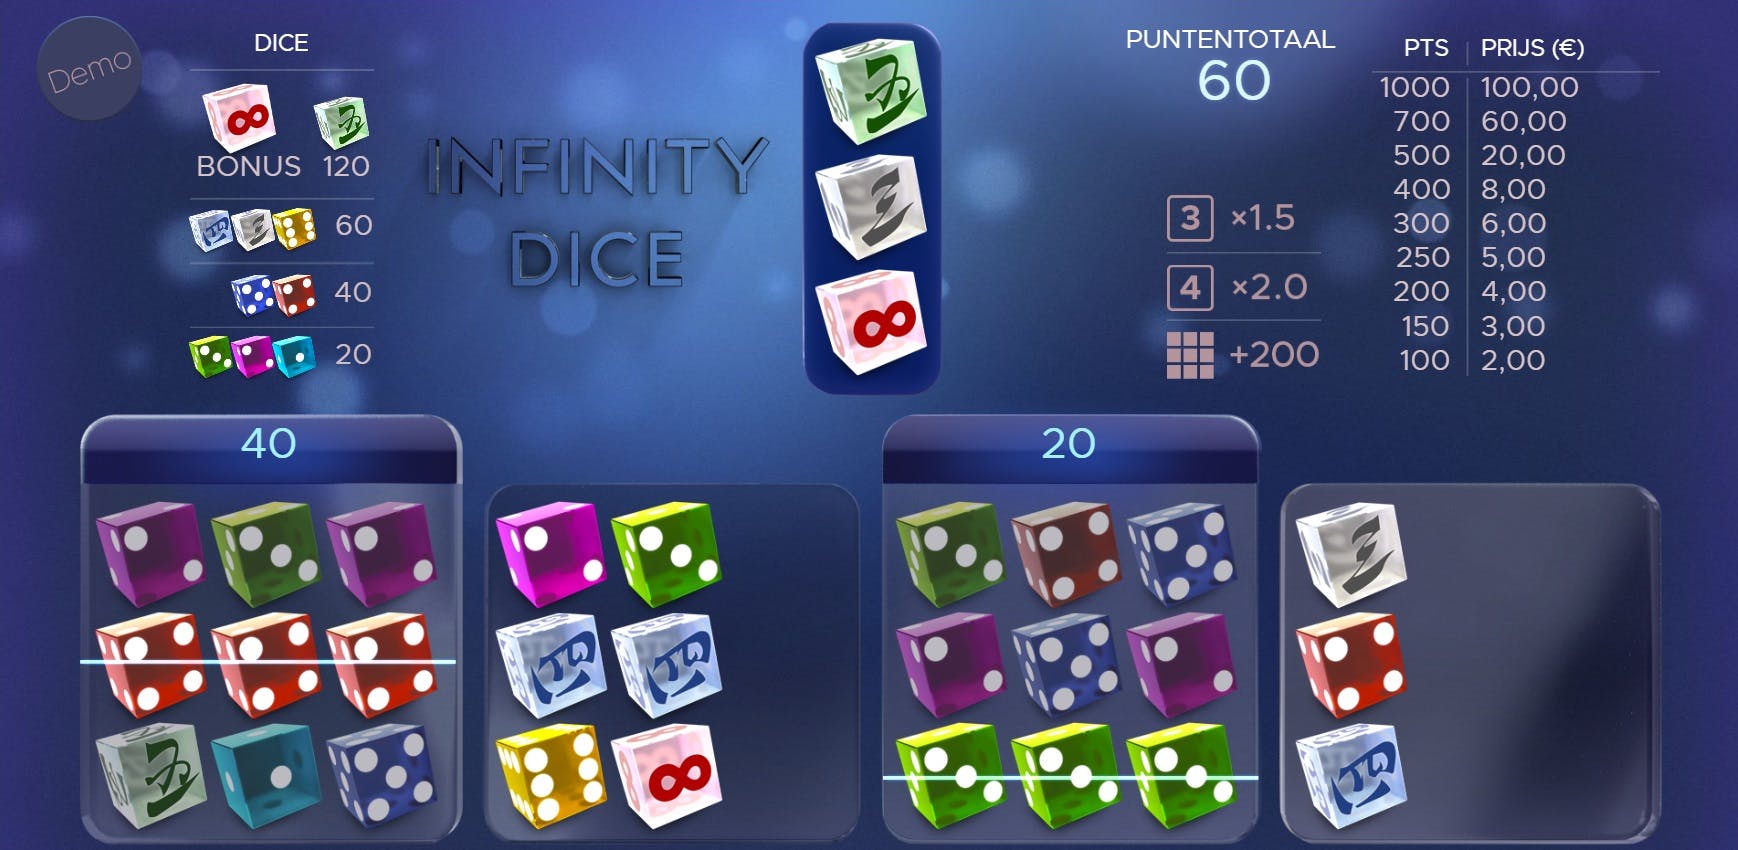 Airdice Infinity Dice Game - Test et tips